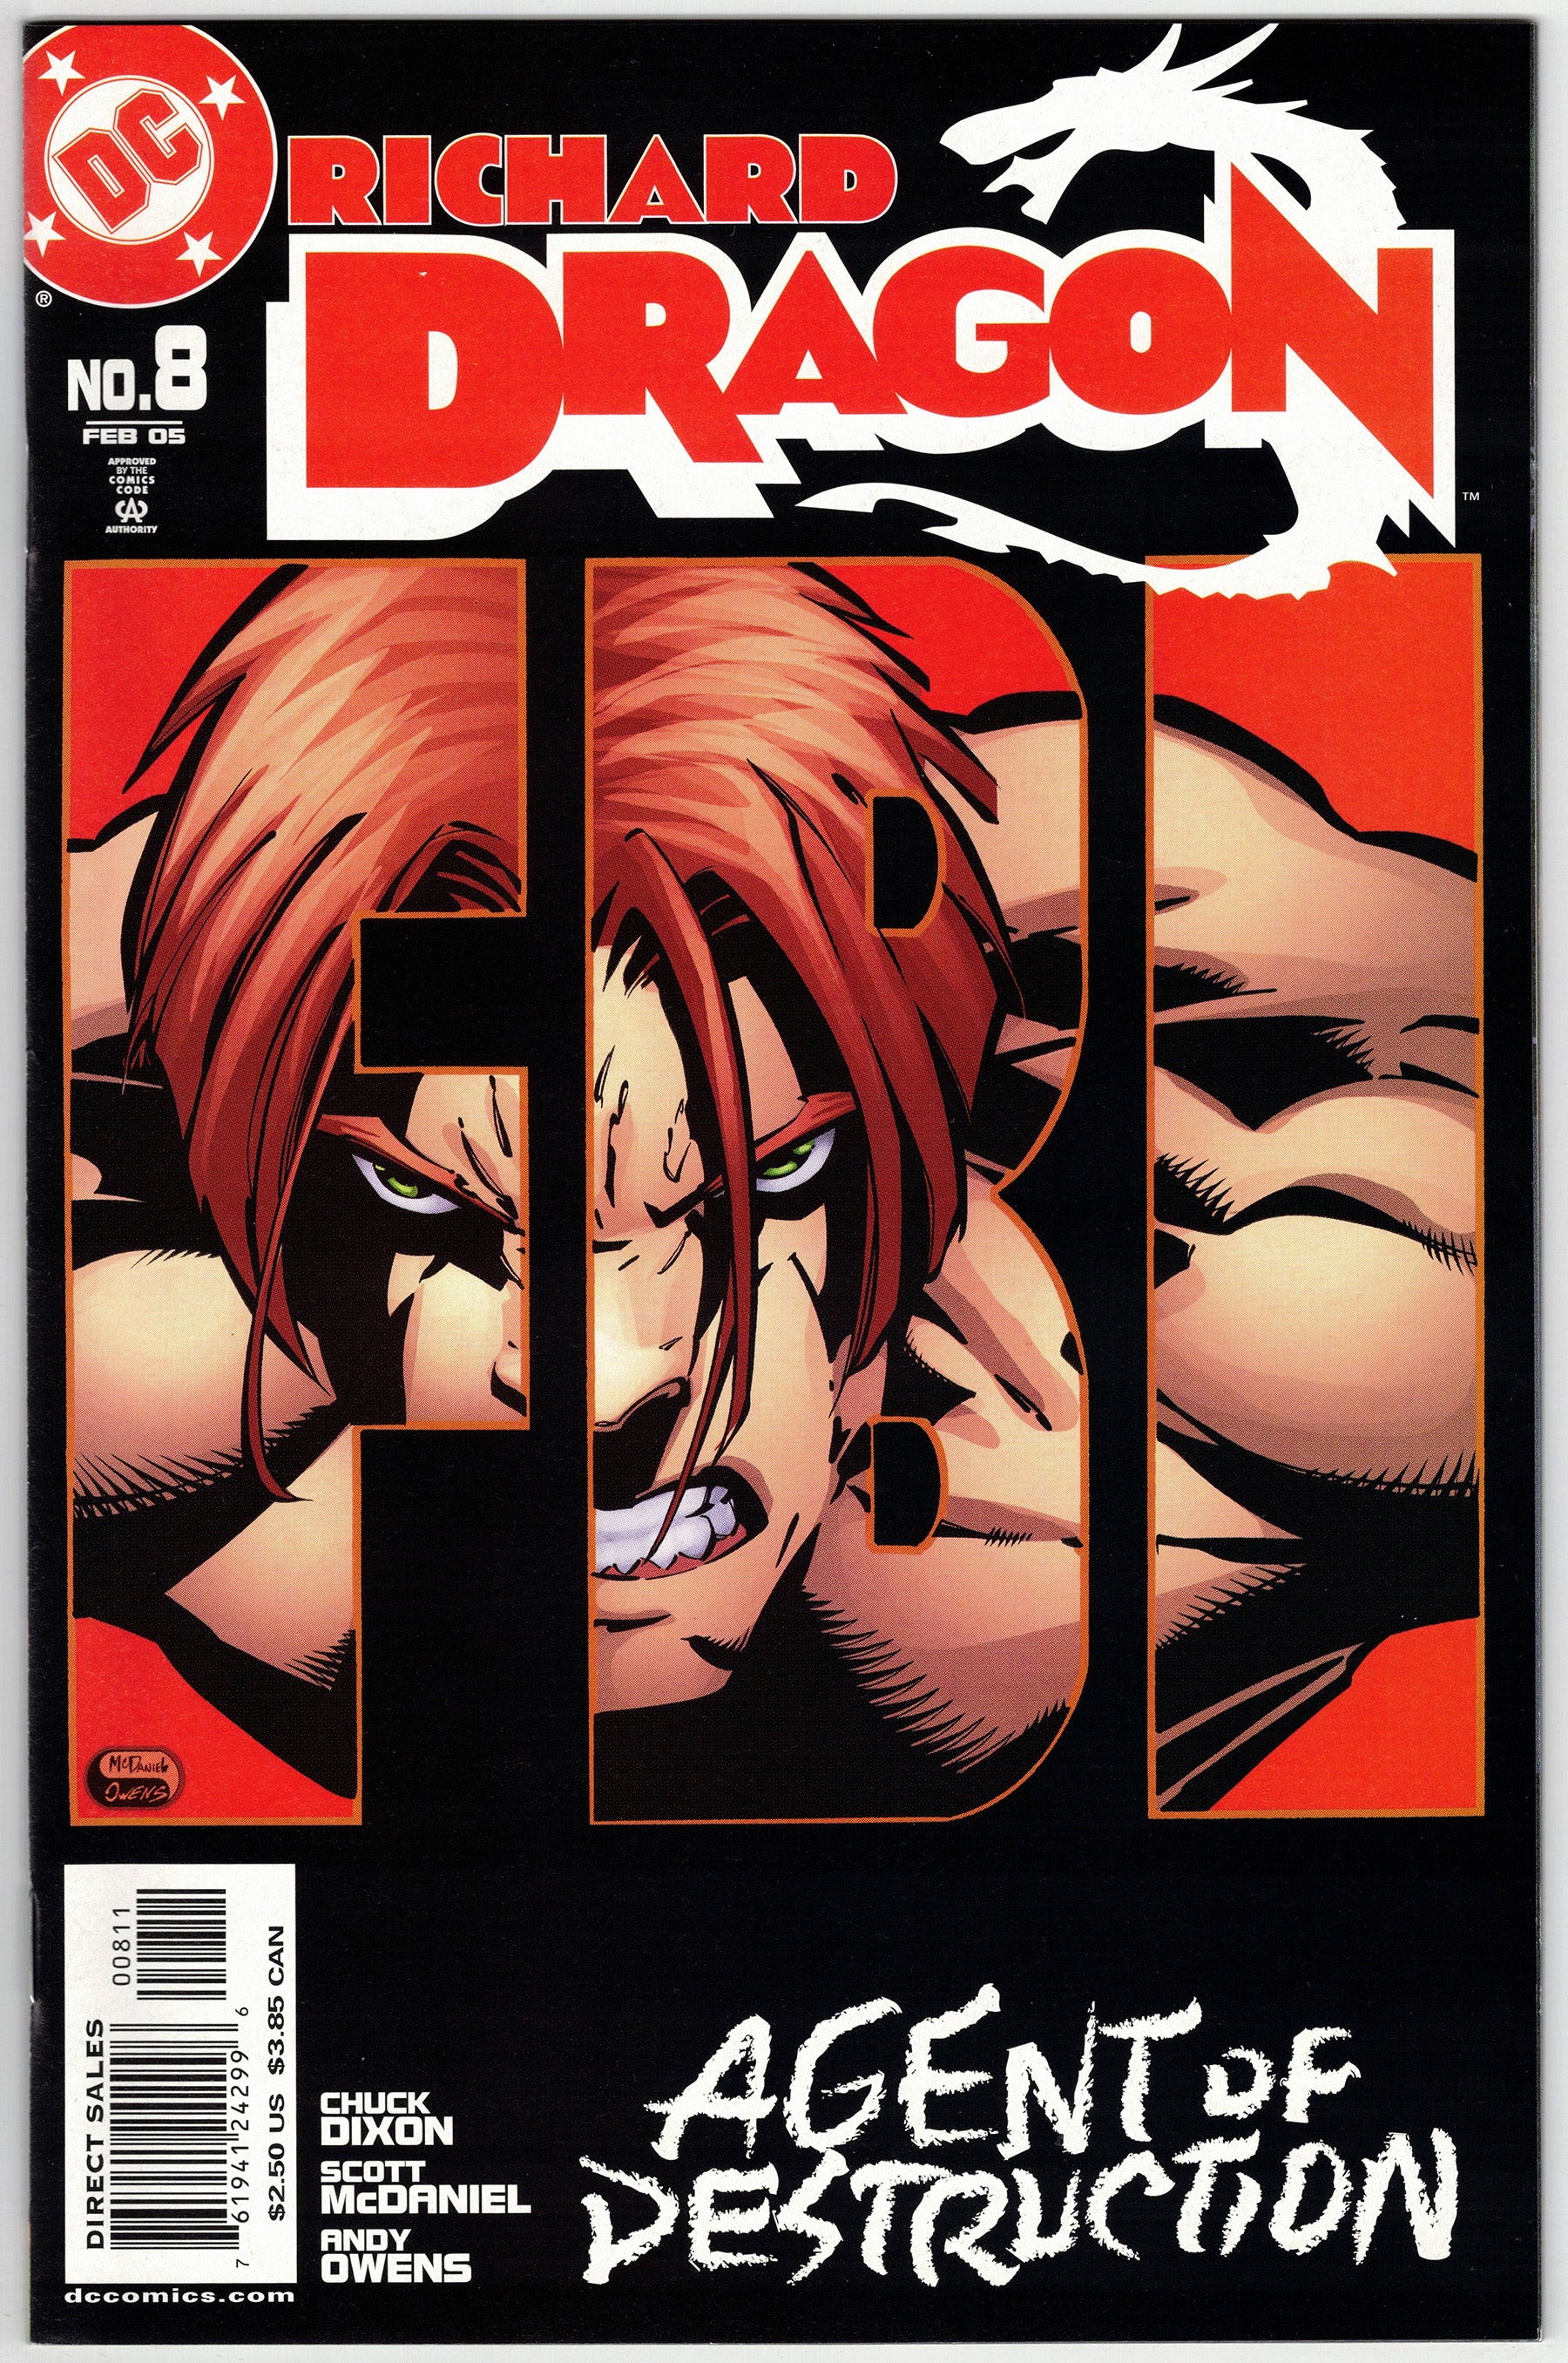 Photo of Richard Dragon (2005) Issue 8 Comic sold by Stronghold Collectibles